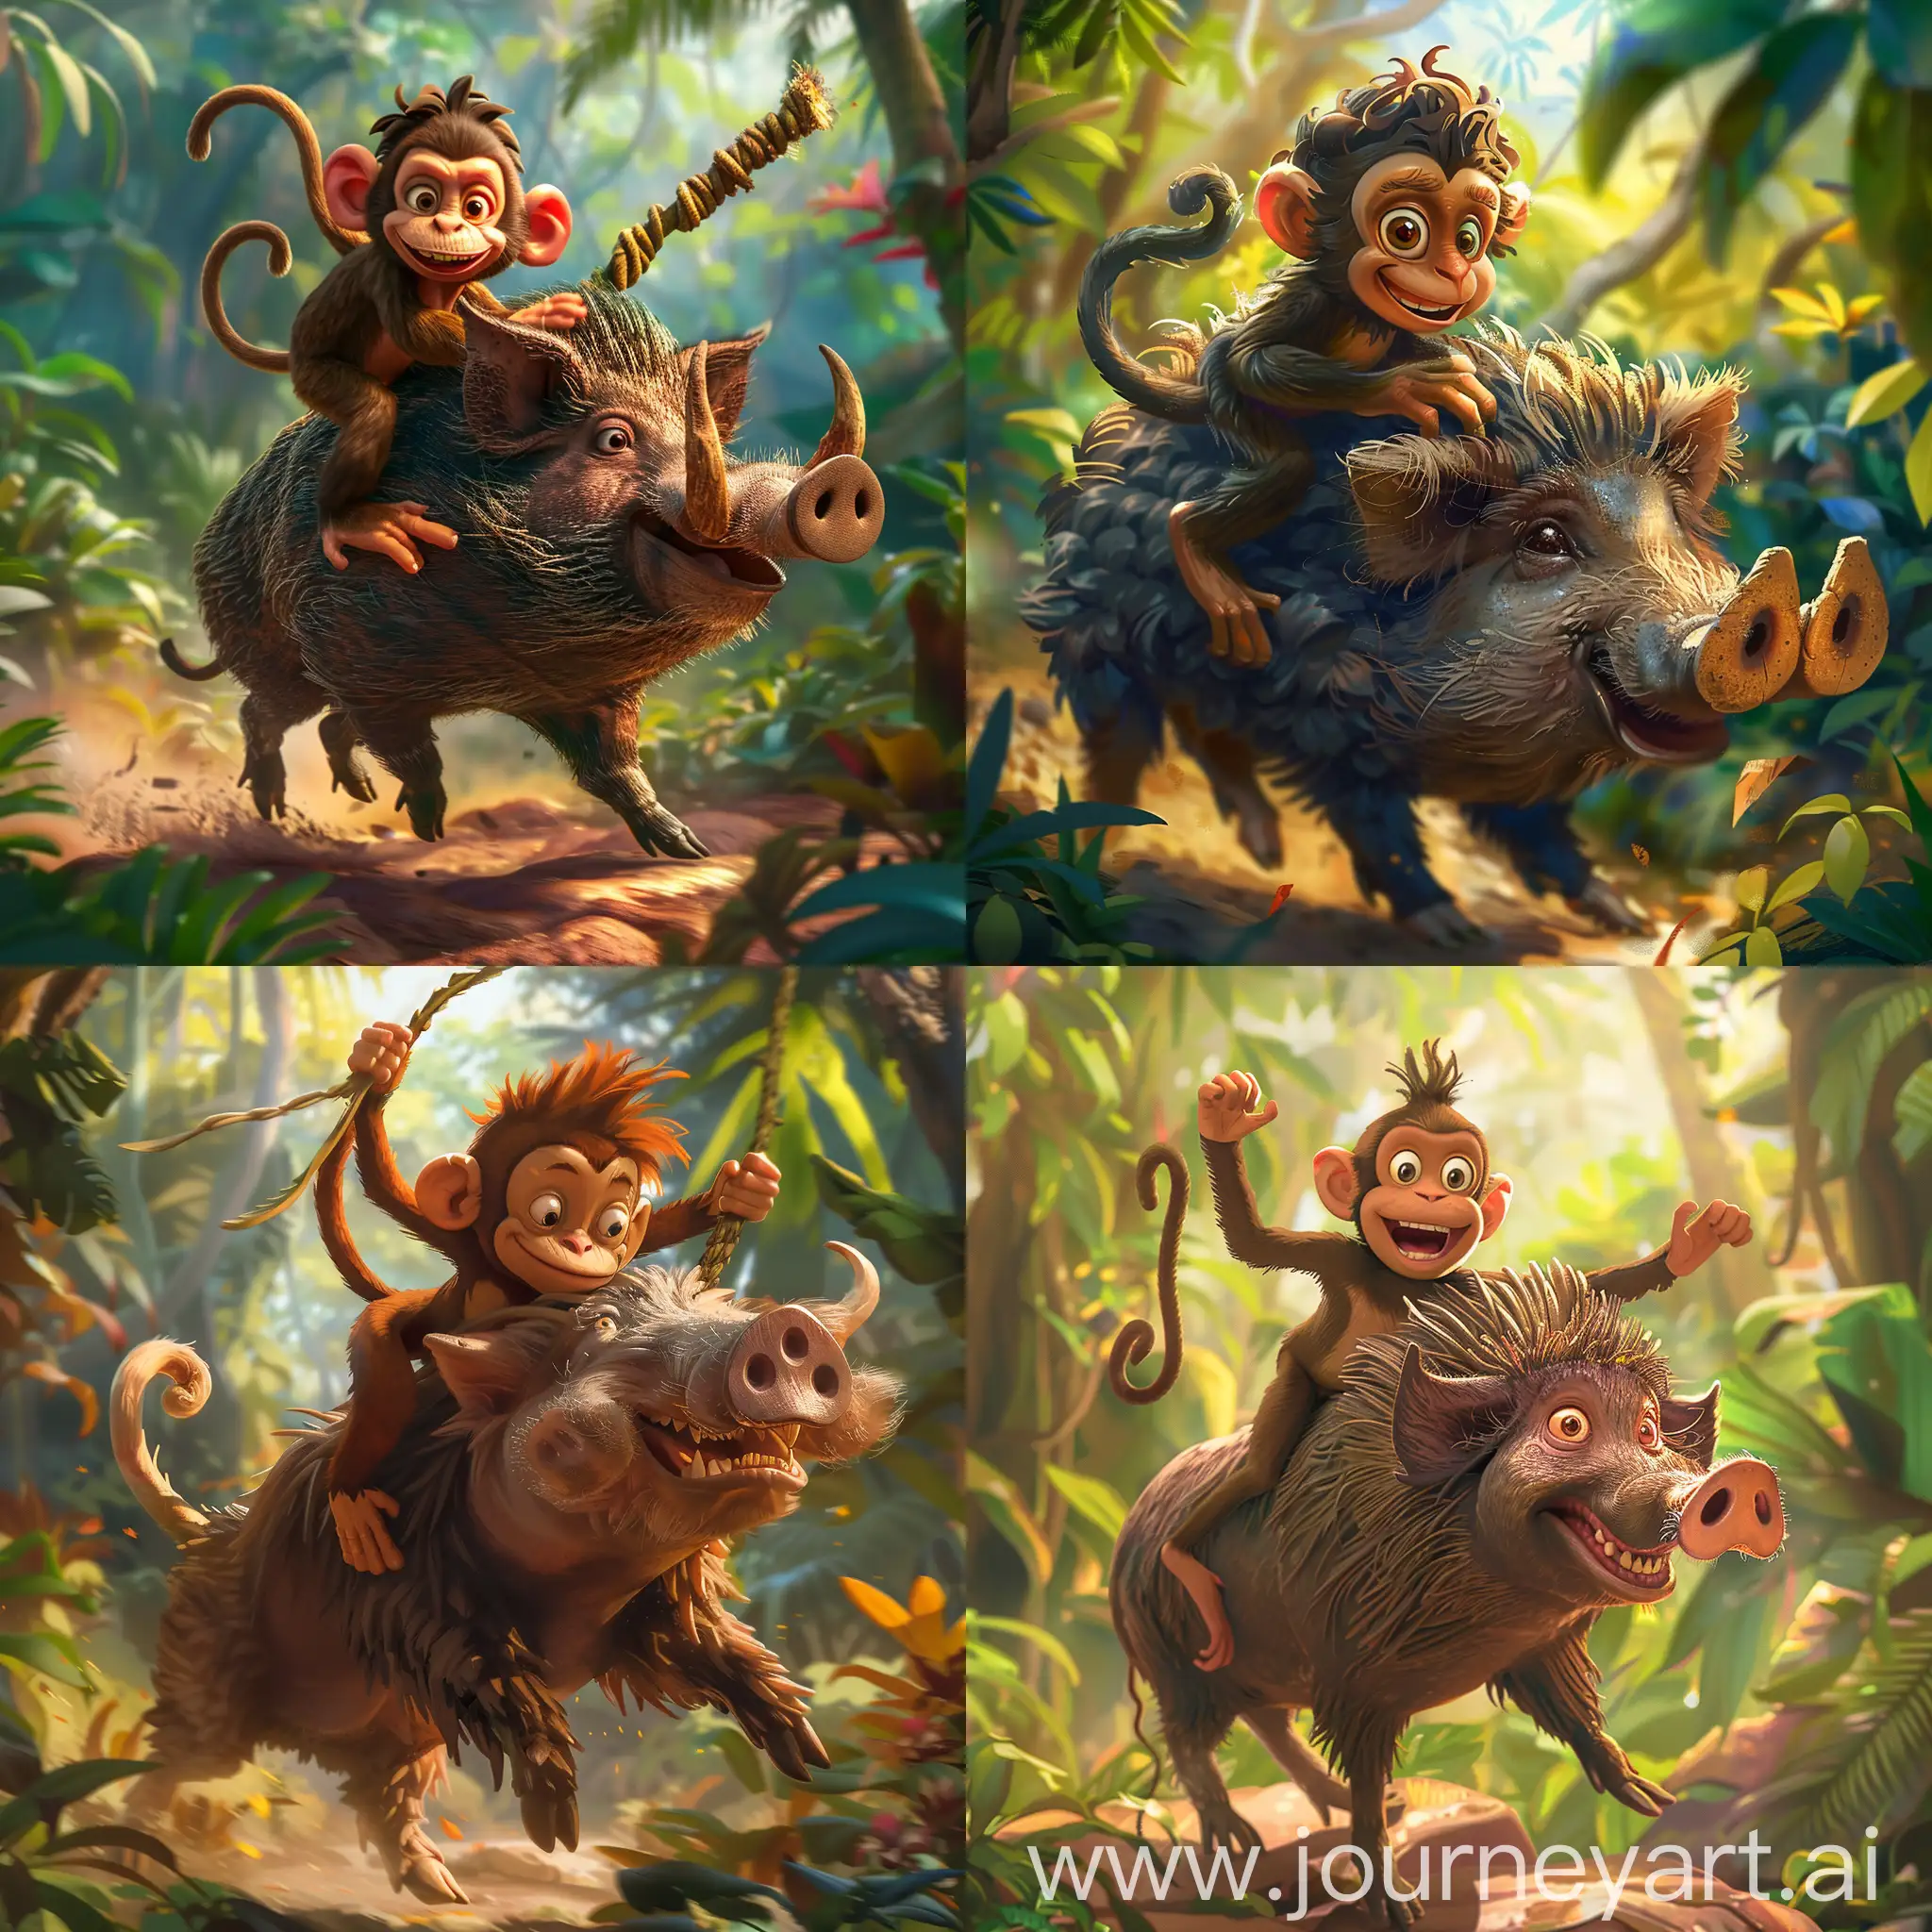 A playful scene featuring a mischievous monkey riding a sturdy boar, rendered in a whimsical, animated style reminiscent of classic Disney cartoons. The monkey is shown holding onto the boar's rough fur with a gleeful expression, while the boar is depicted with realistic textures and dynamic movement. The background features a lush, jungle setting with vibrant foliage and dappled sunlight filtering through the canopy above. --s 150 --ar 1:1 --c 5